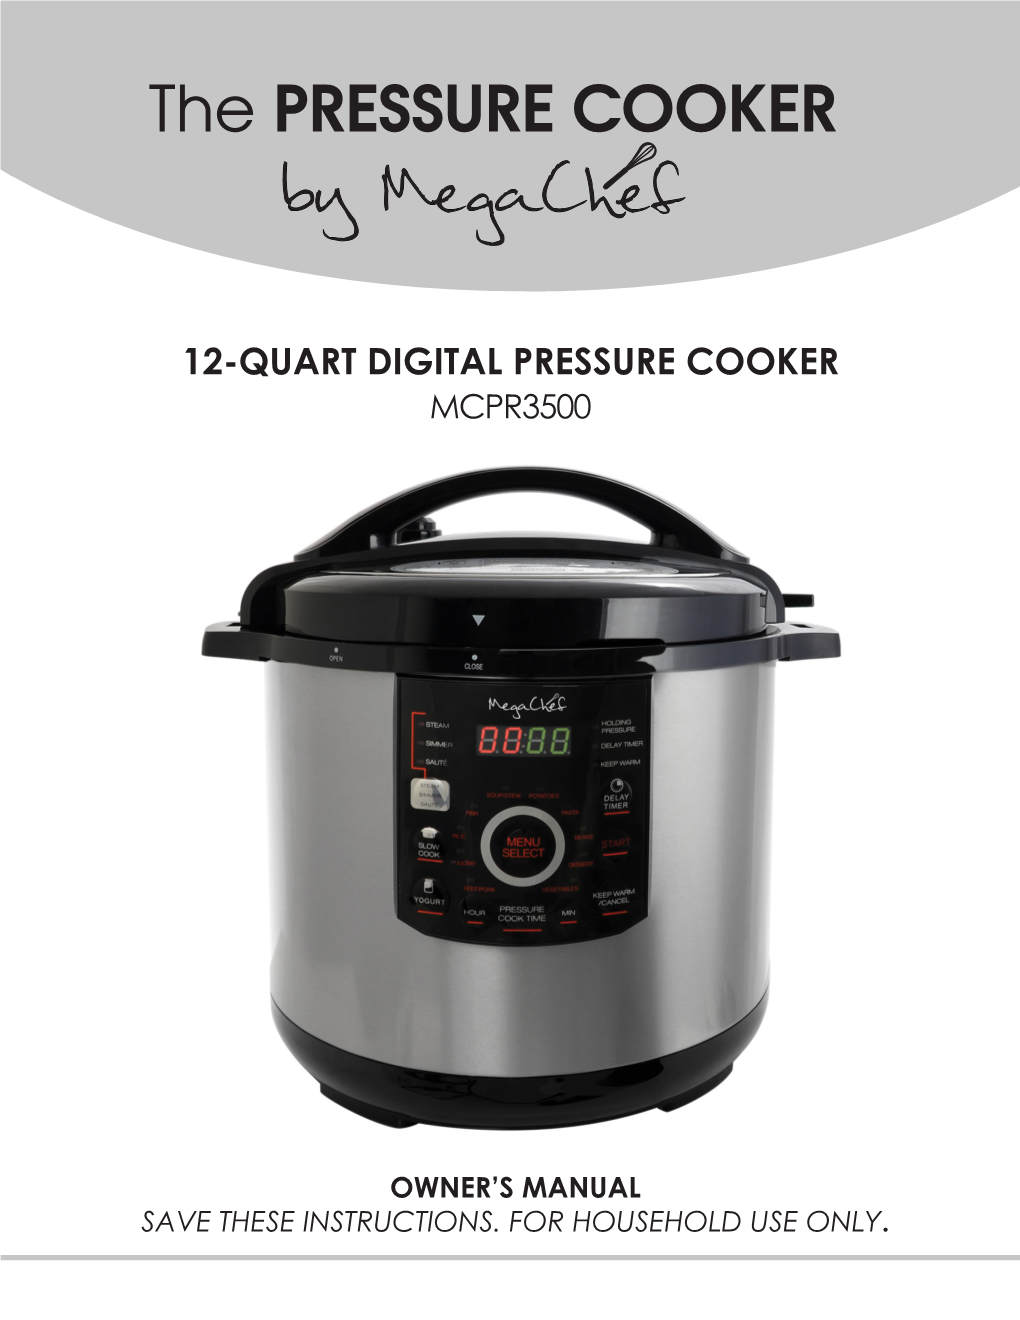 The PRESSURE COOKER by Megachef